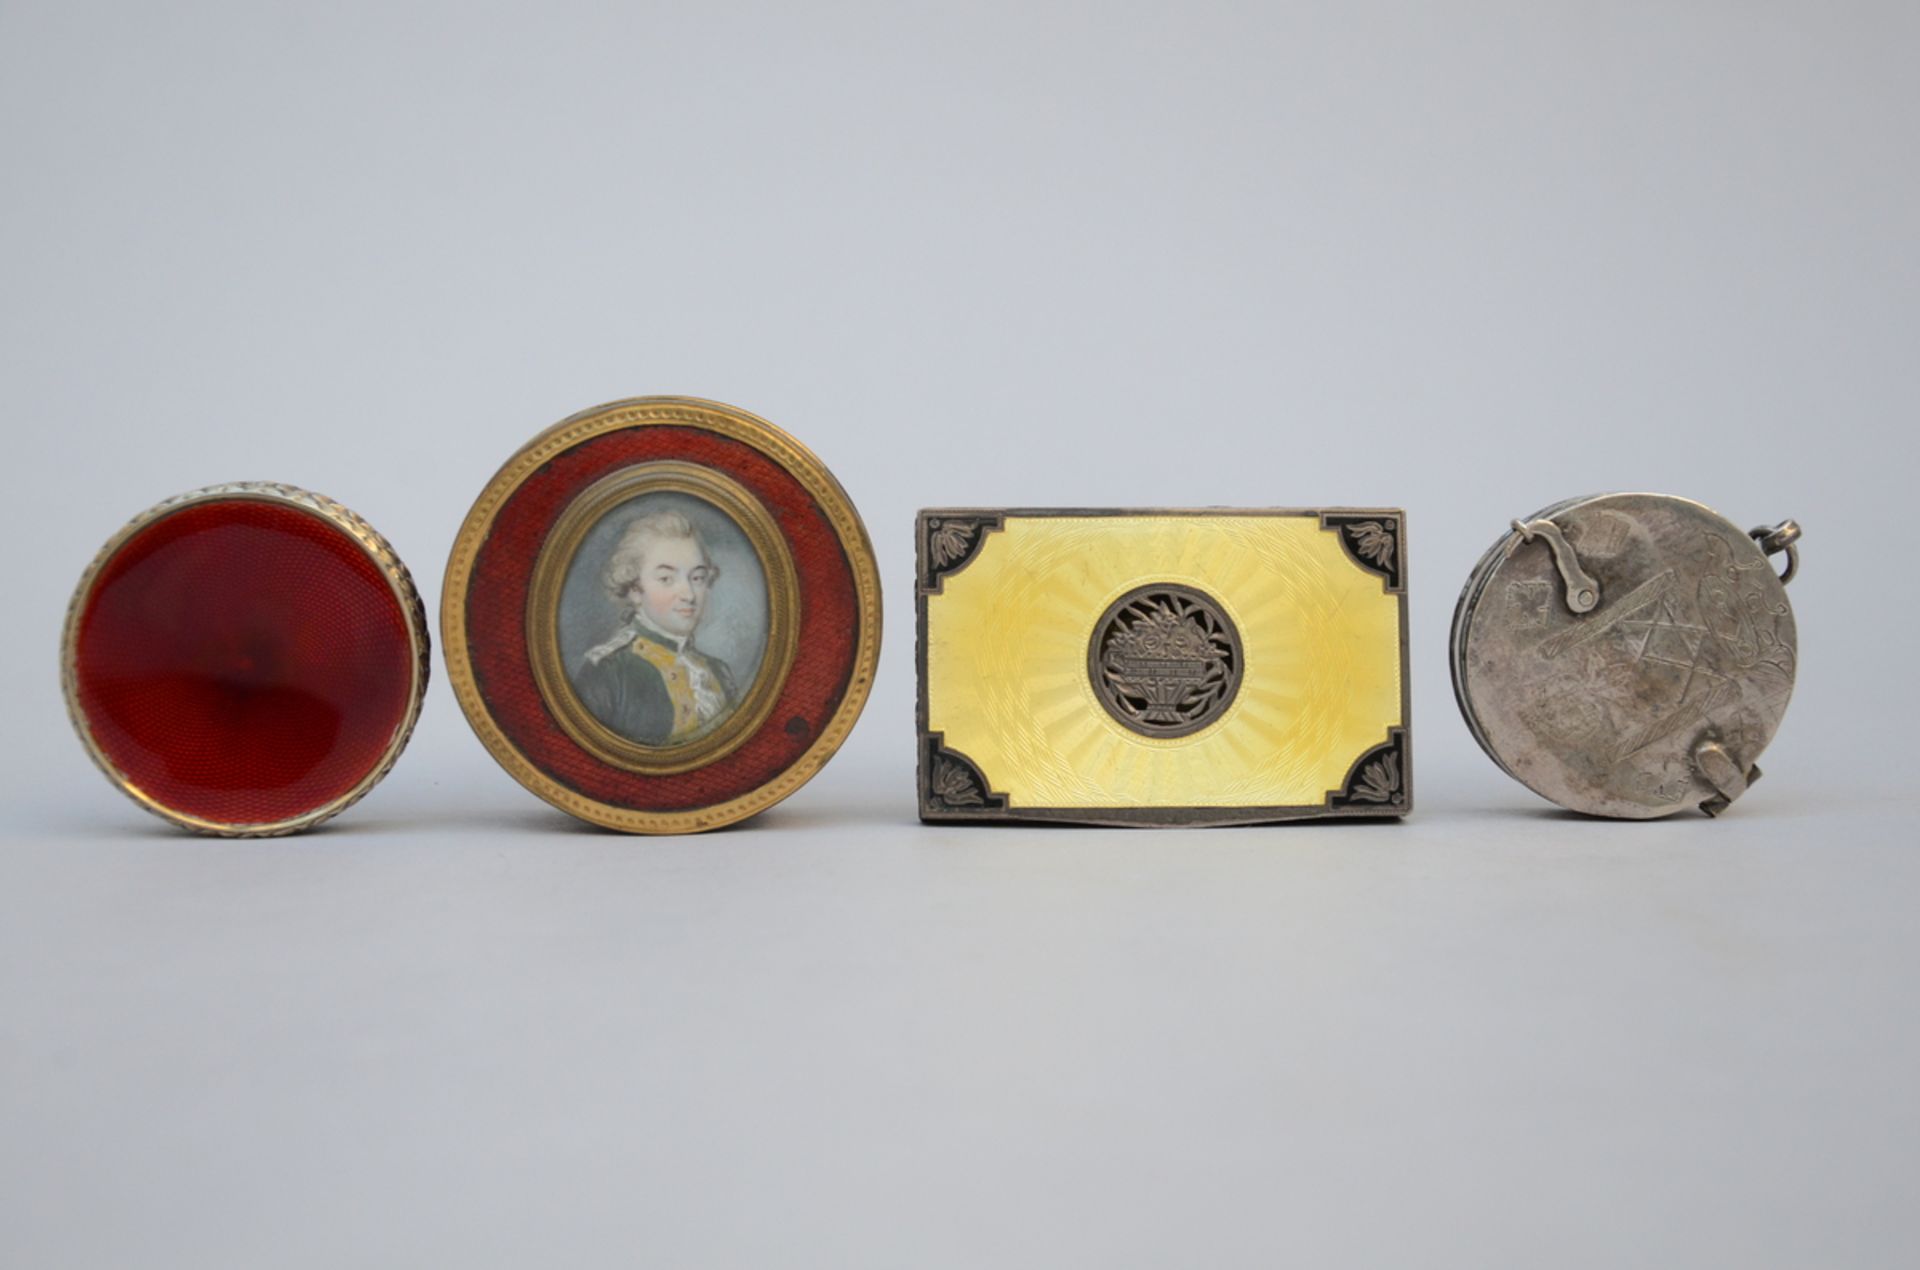 Lot: 4 antique boxes, 18th and 19th century (*)